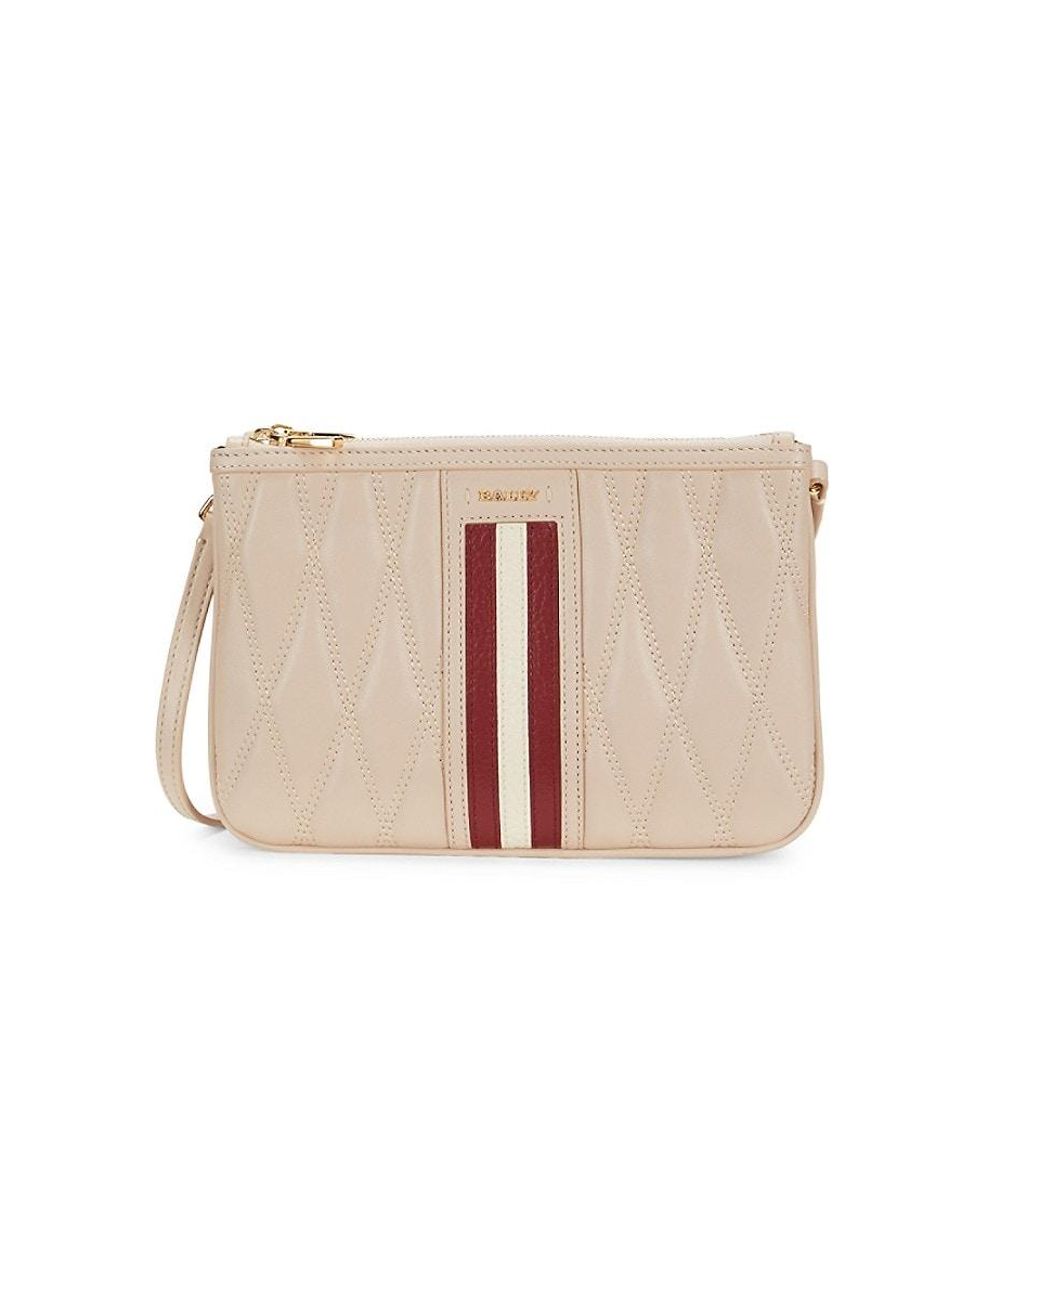 Bally Diamond Quilted Leather Crossbody Bag